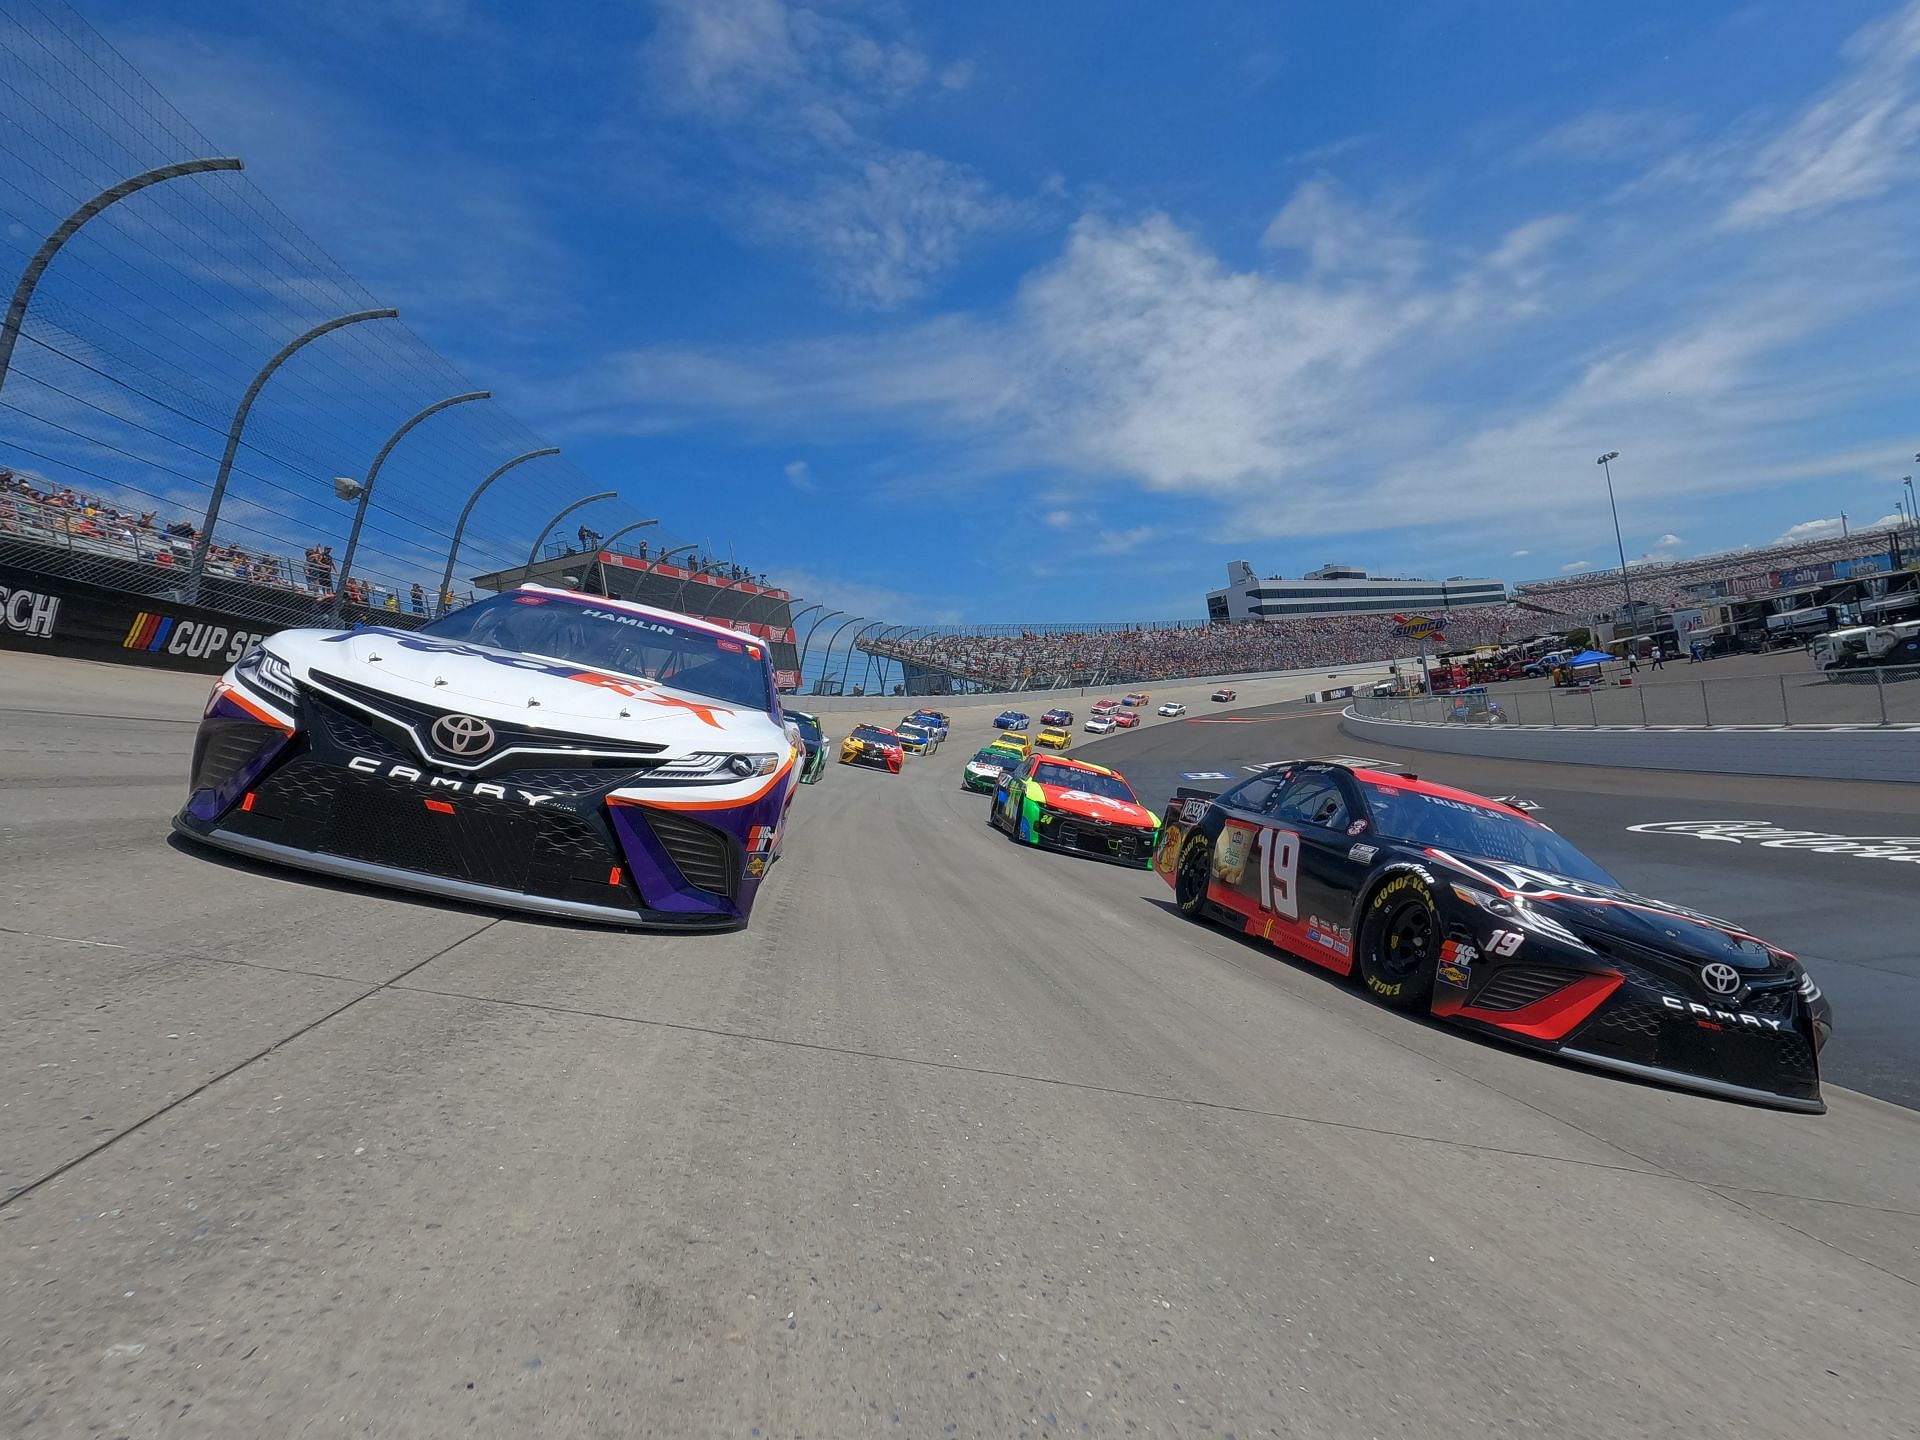 Denny Hamlin and Martin Truex Jr. race during the 2021 NASCAR Cup Series Drydene 400 at Dover Motor Speedway in Dover, Delaware. (Photo by Sean Gardner/Getty Images)